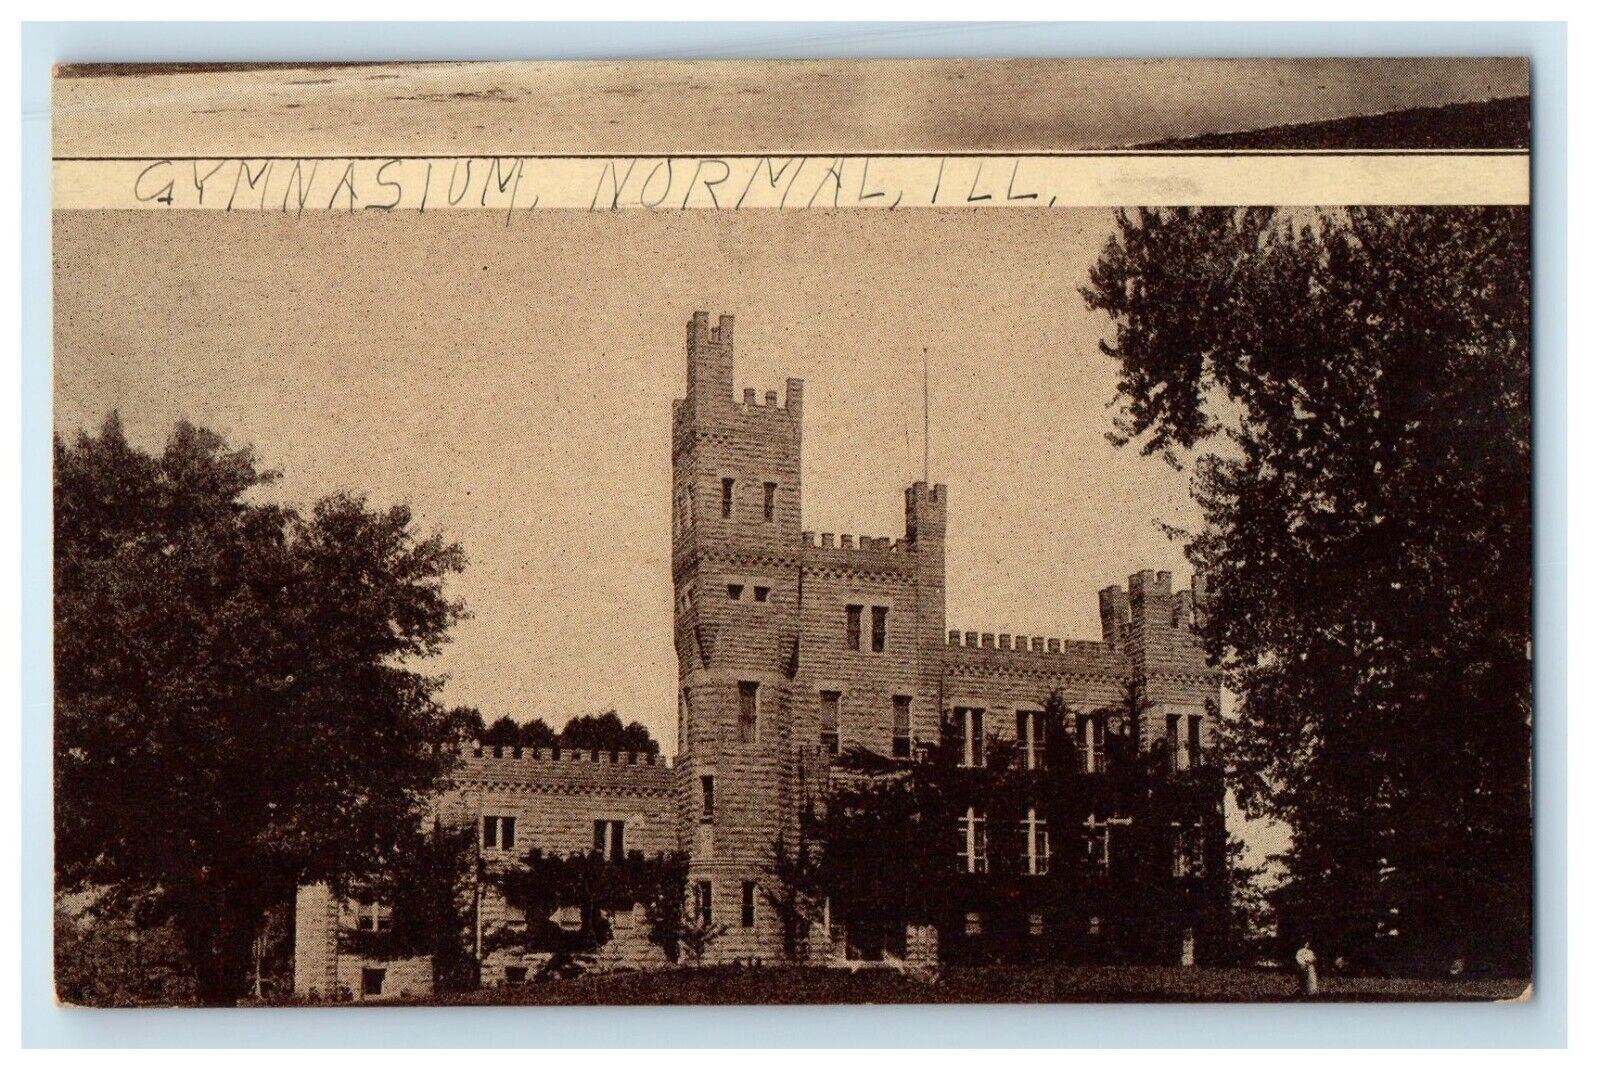 c1910's View Of Gymnasium Normal Illinois IL Unposted Antique Postcard